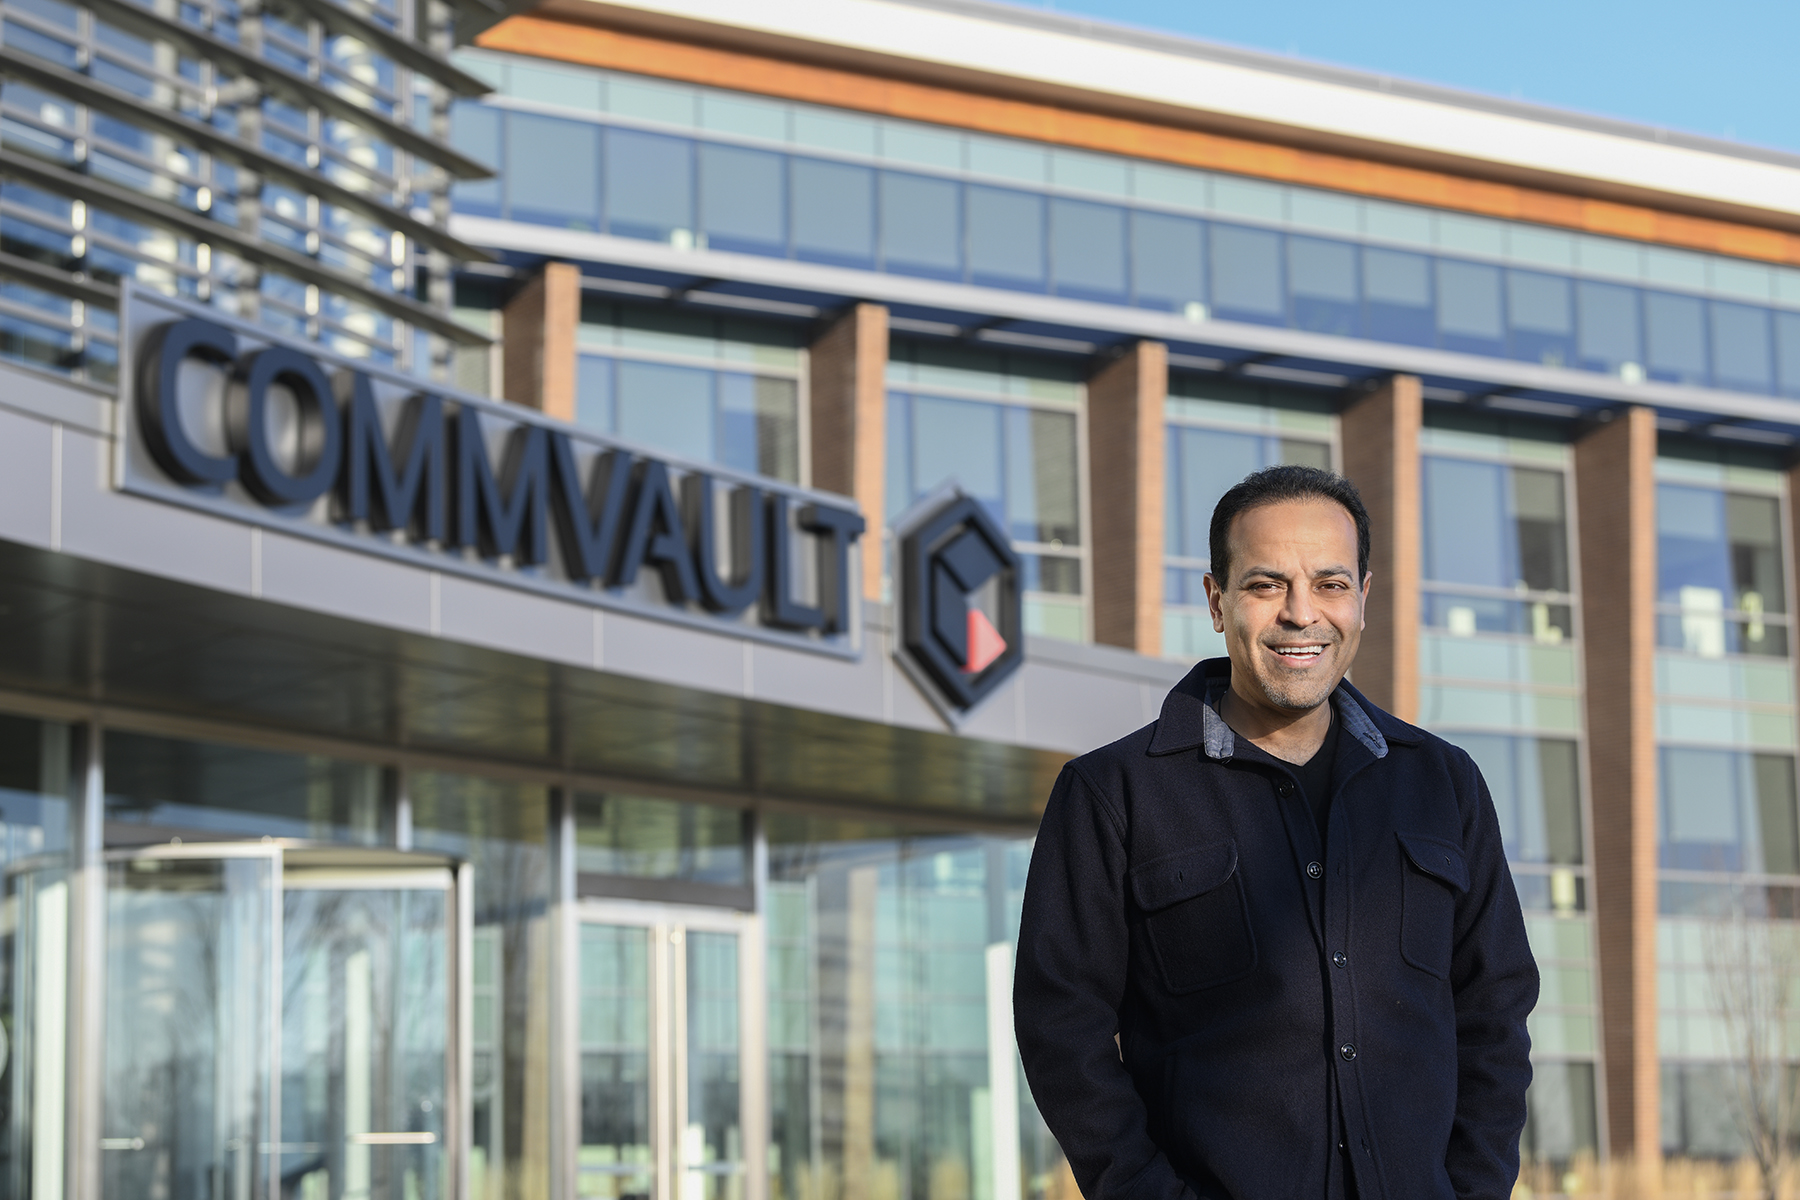 Commvault Enters Into A Strategic Agreement With Microsoft To Deliver SaaS And Cloud Technology For Data Management